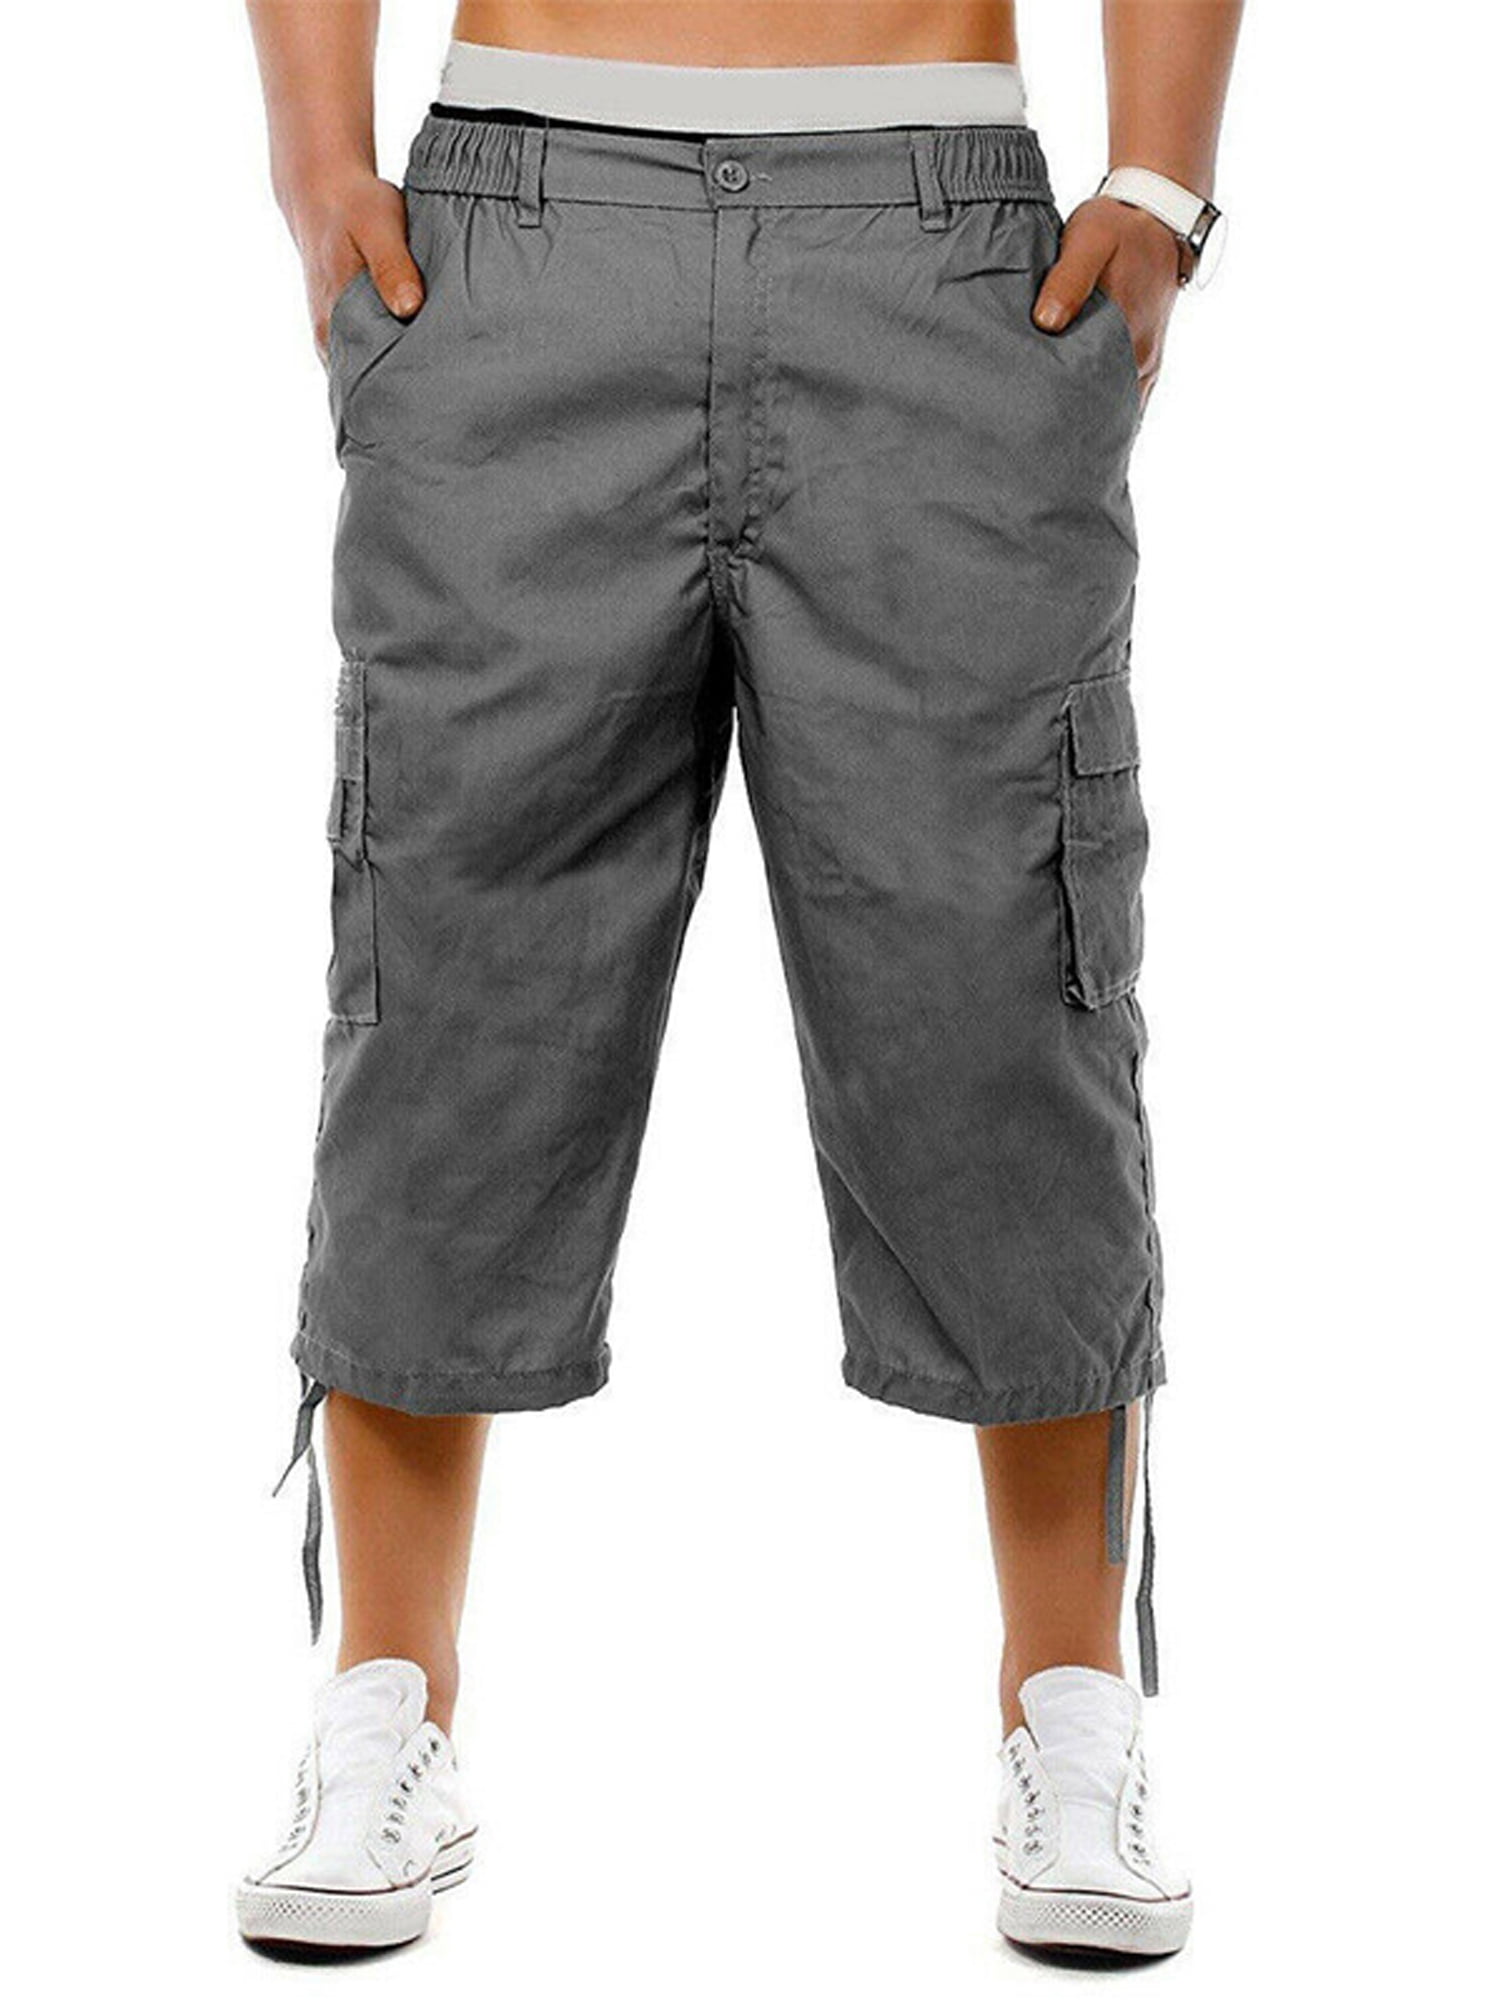 wybzd Men's Classic Relaxed Fit Cargo Shorts Summer Athletic 3/4 